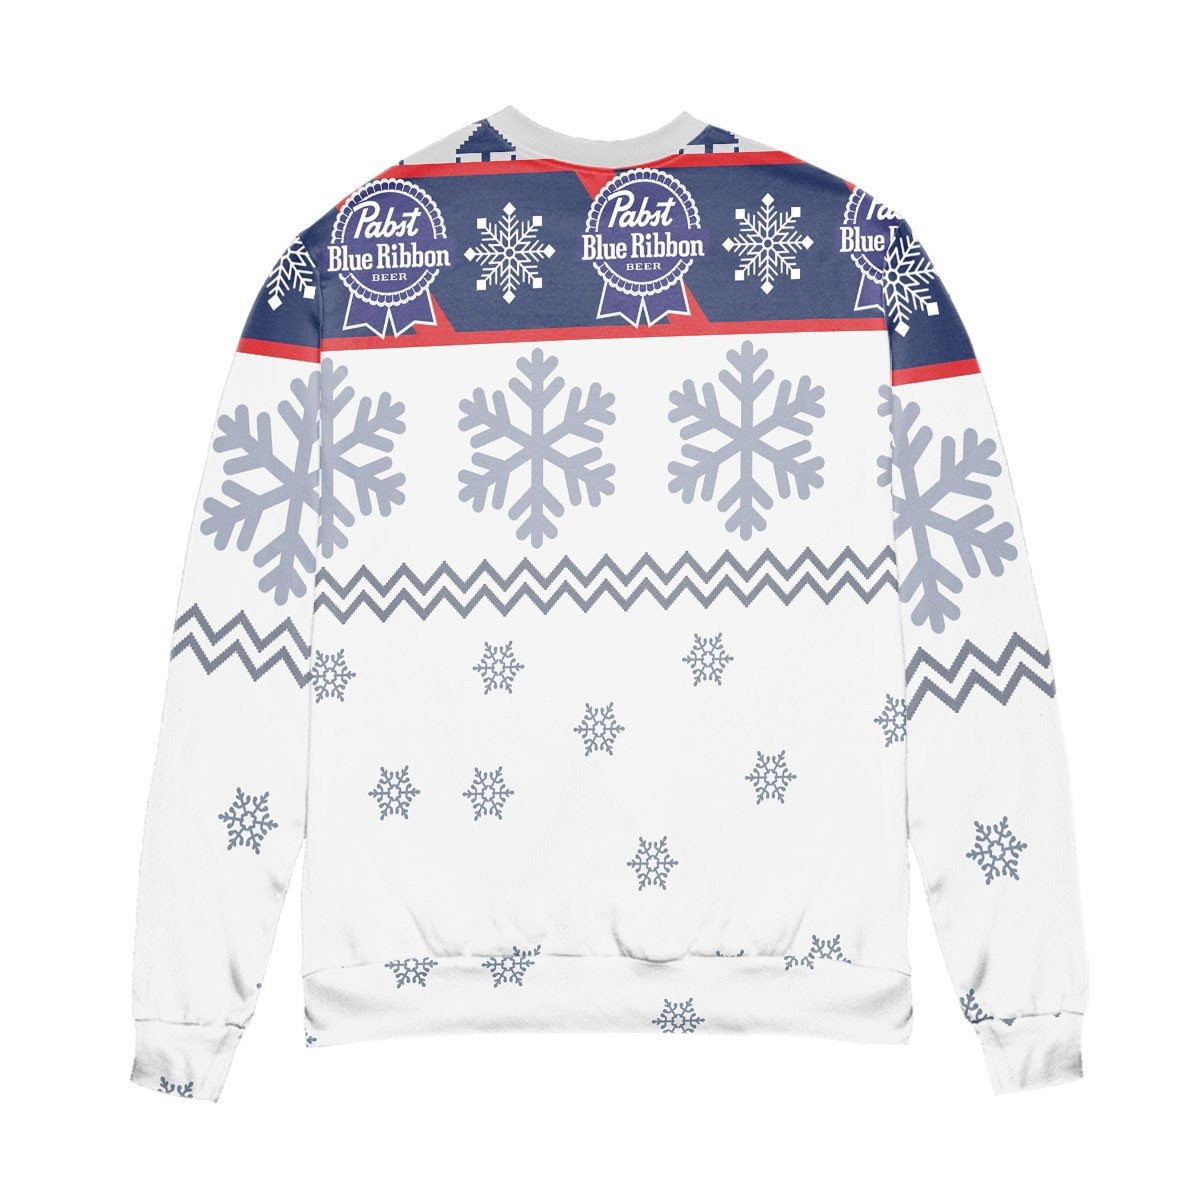 Pabst Blue Ribbon Beer Christmas White 3D Sweater